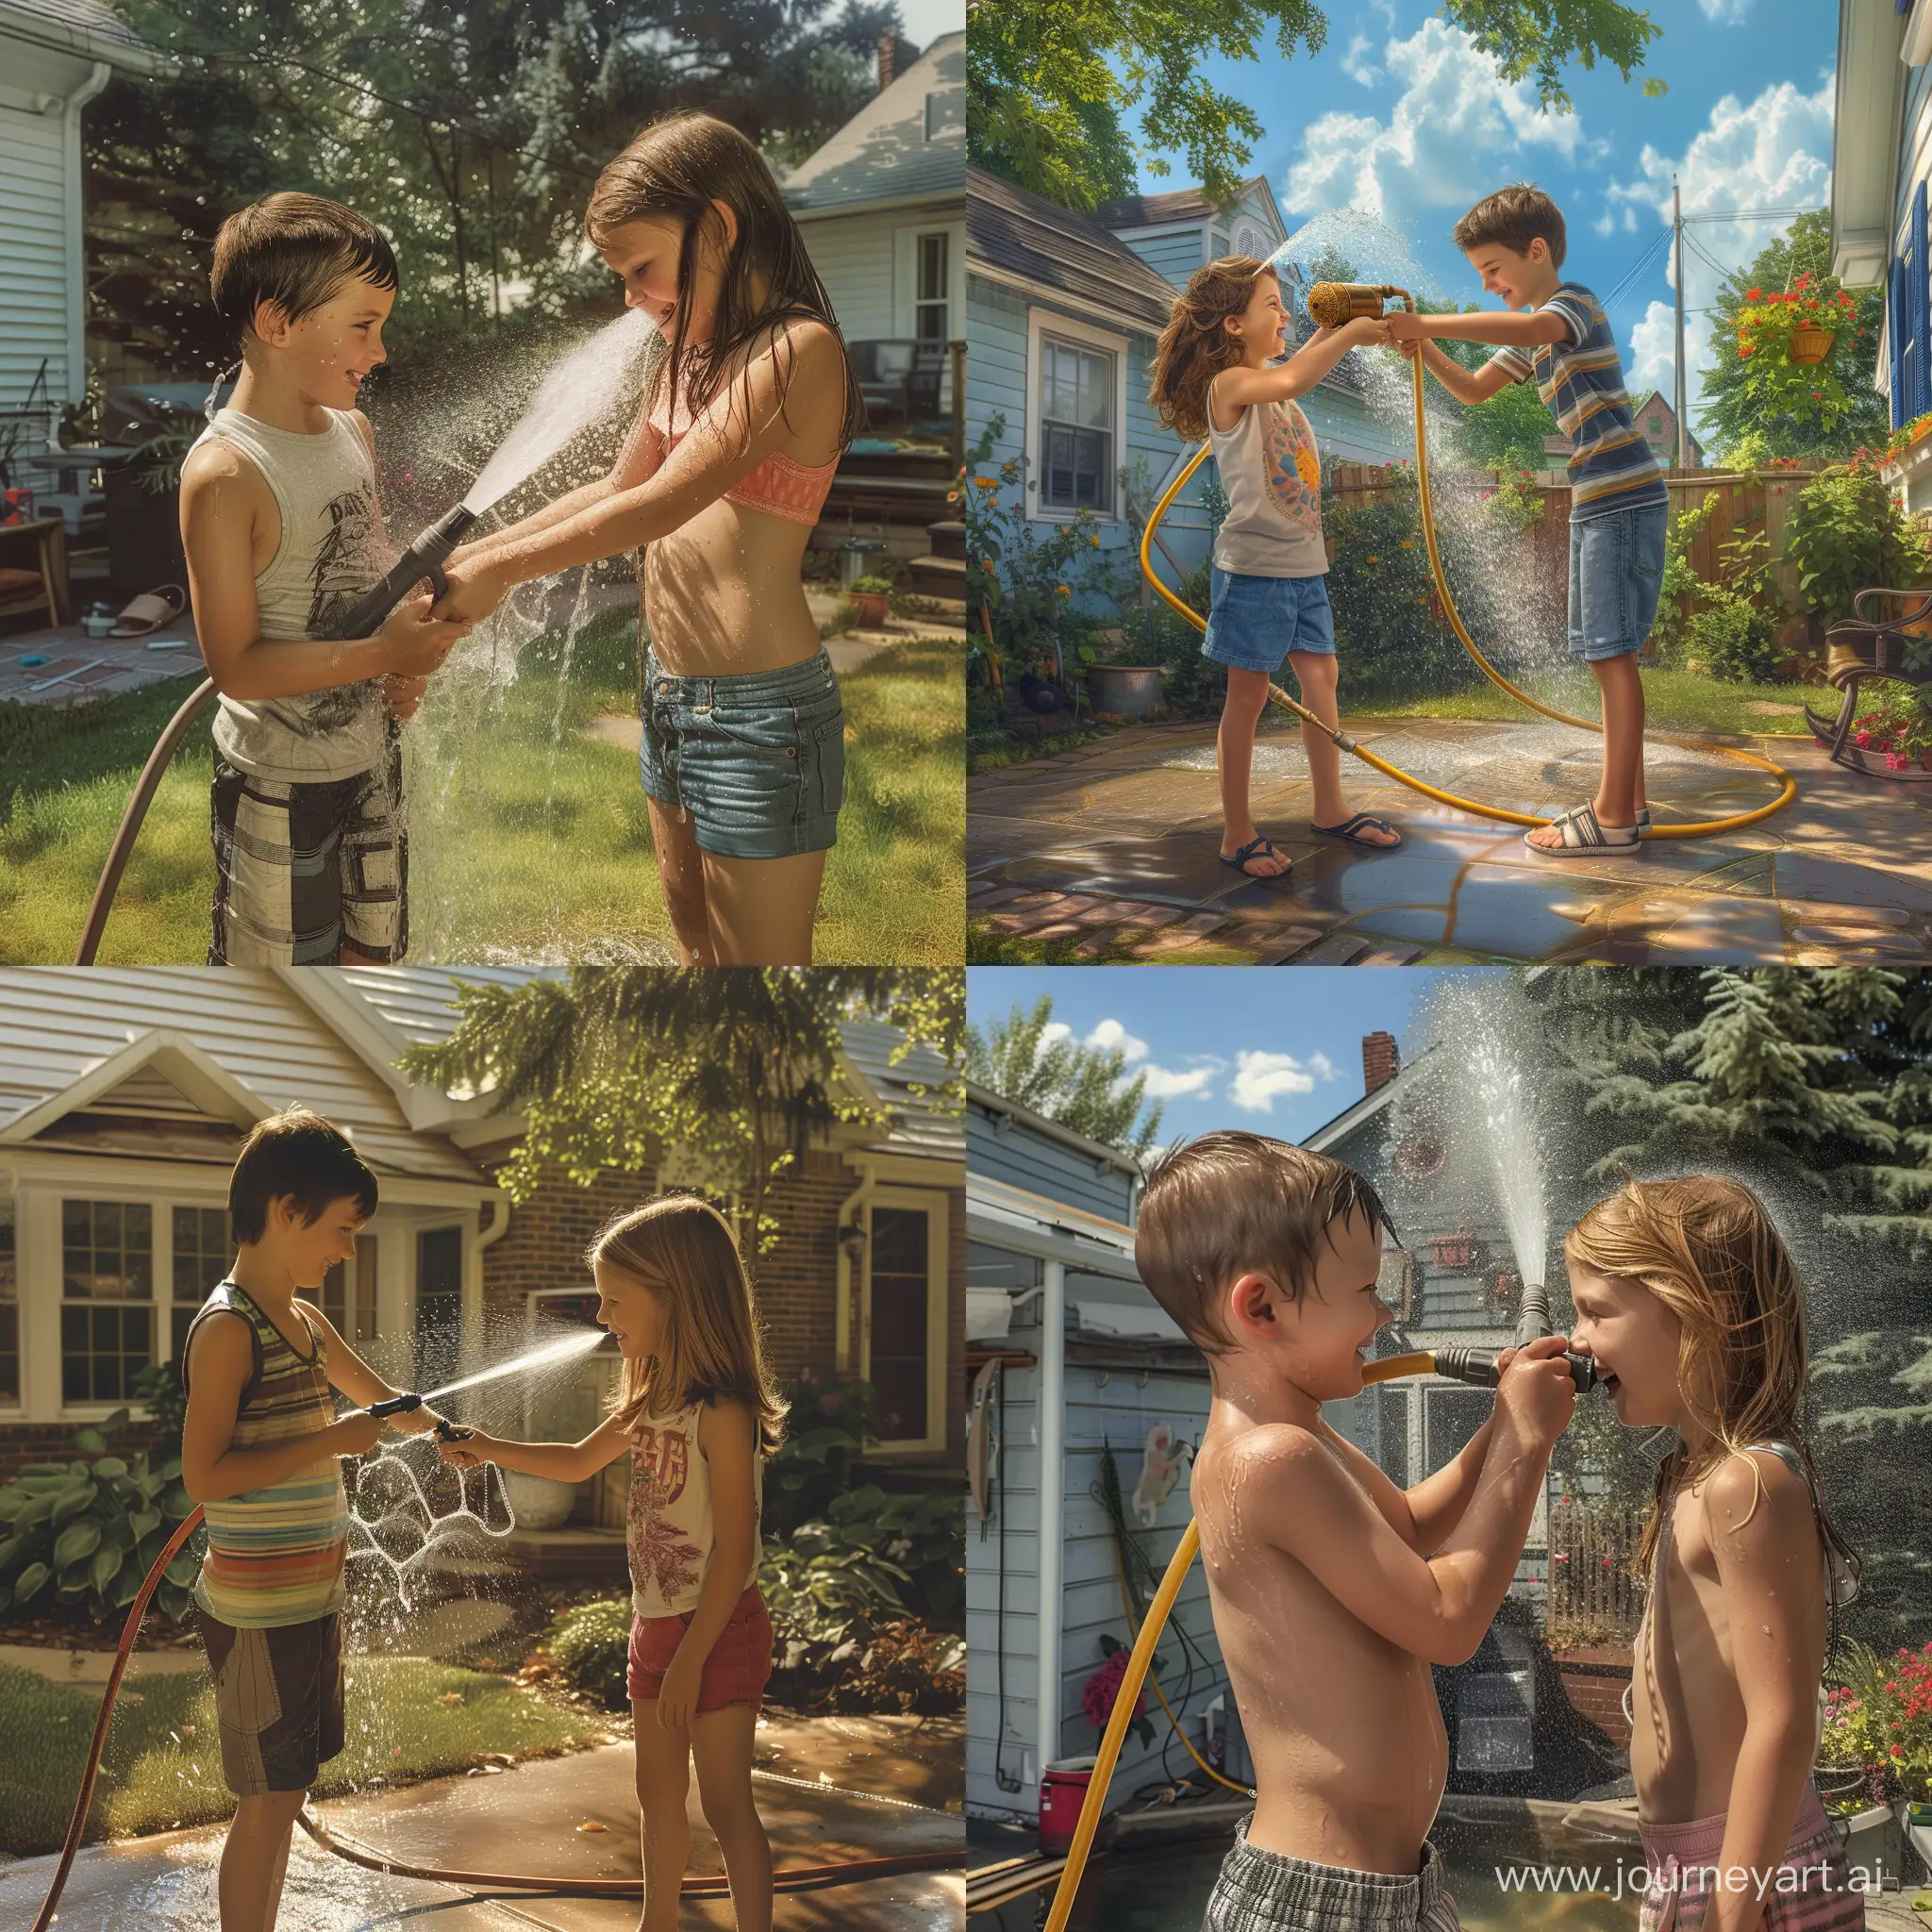 Playful-Children-Watering-Each-Other-in-Sunny-Backyard-Hyperrealism-Photograph